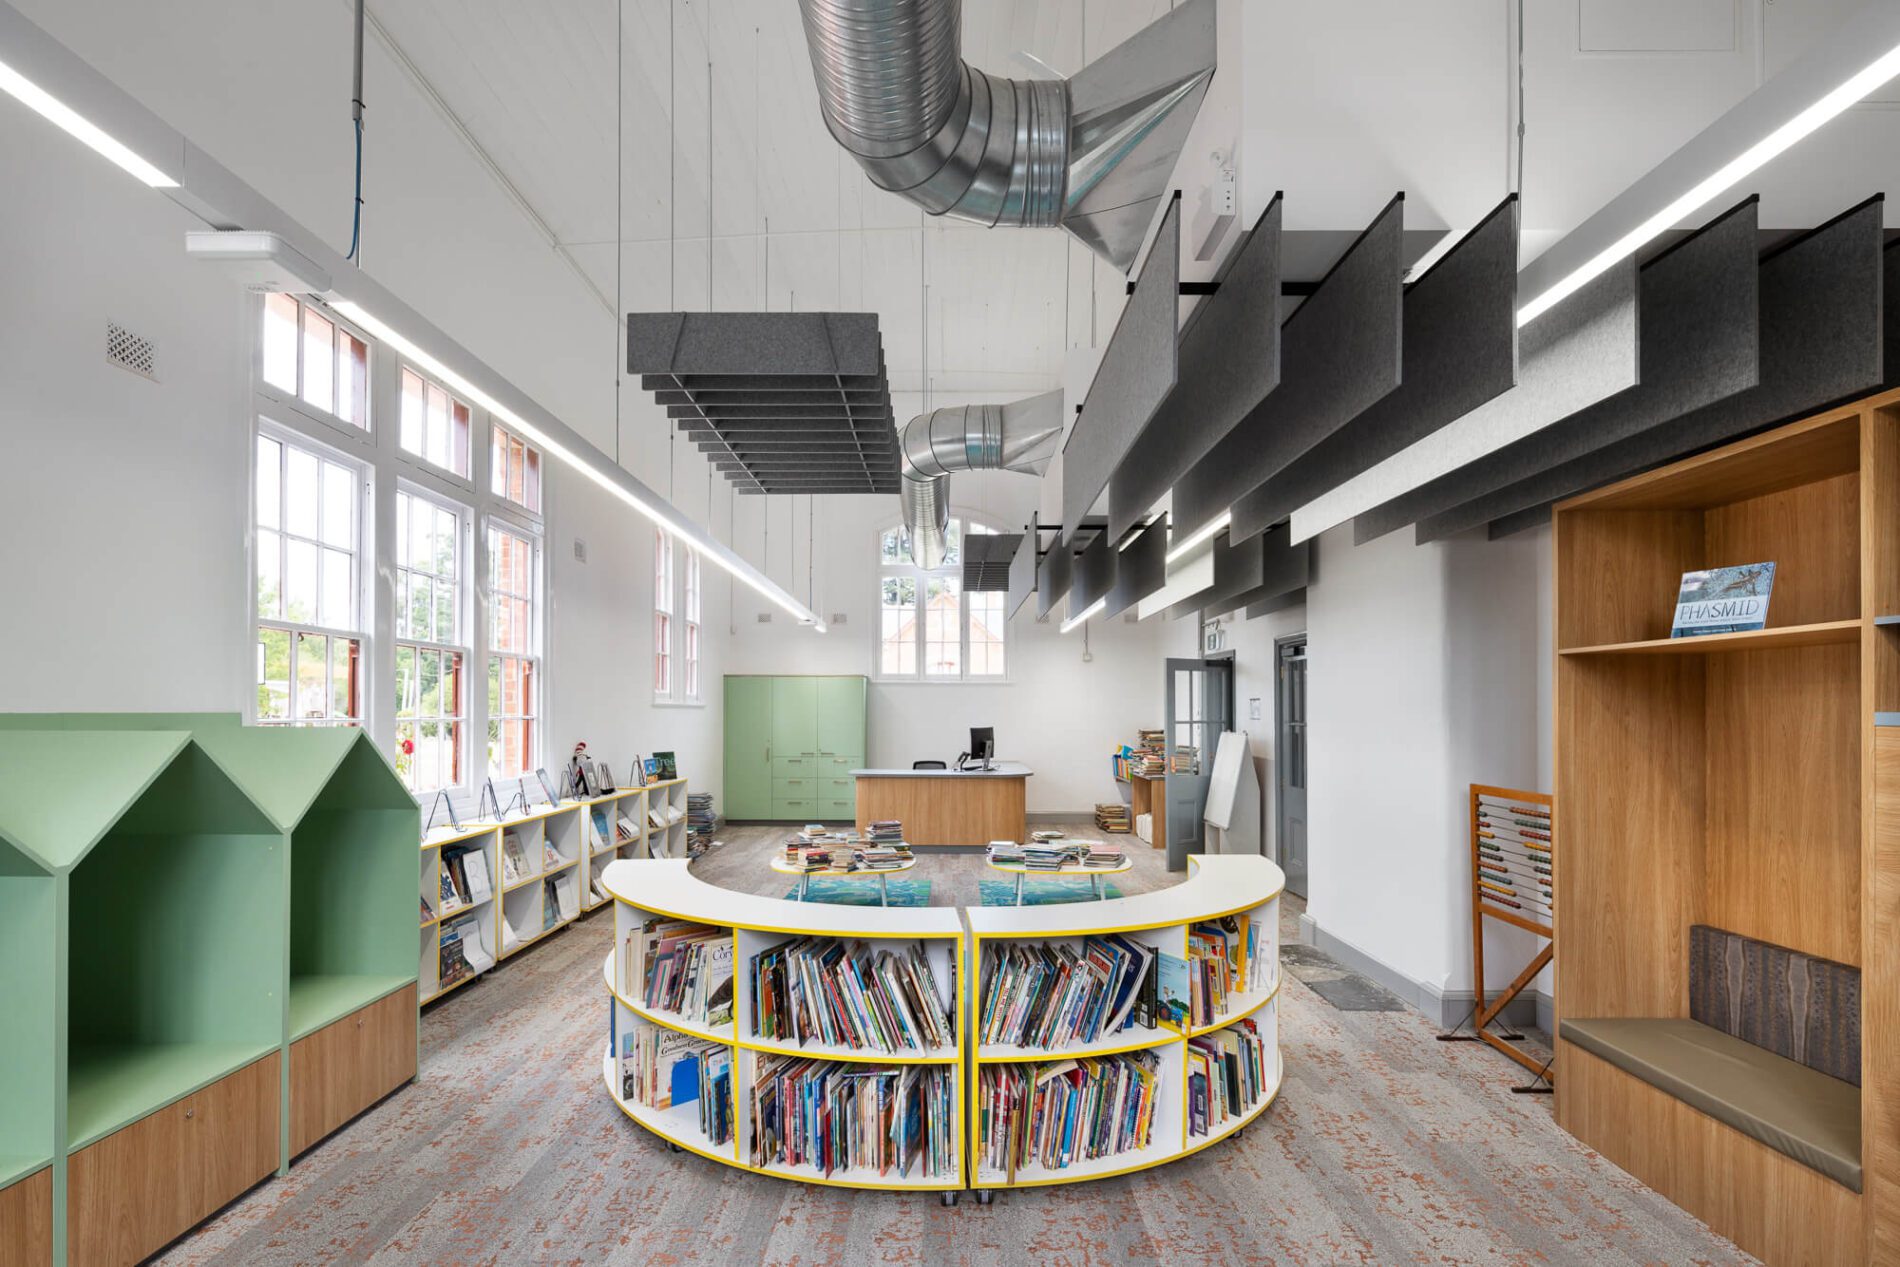 Library space with acoustic ceiling baffles, book display and green, house-shaped cubby nooks